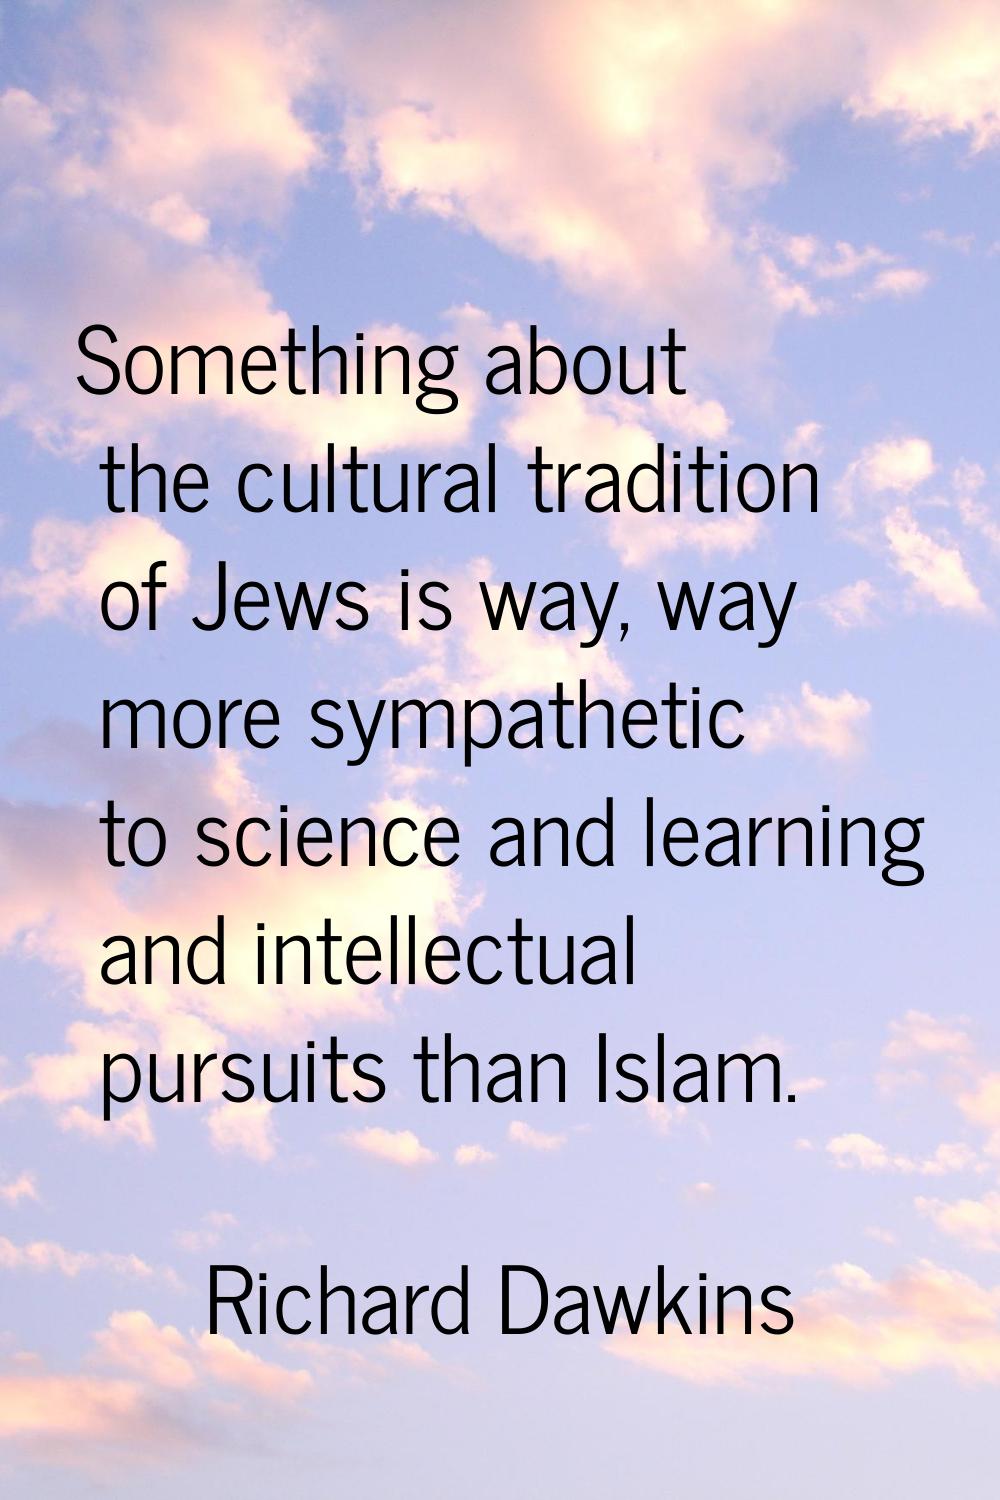 Something about the cultural tradition of Jews is way, way more sympathetic to science and learning